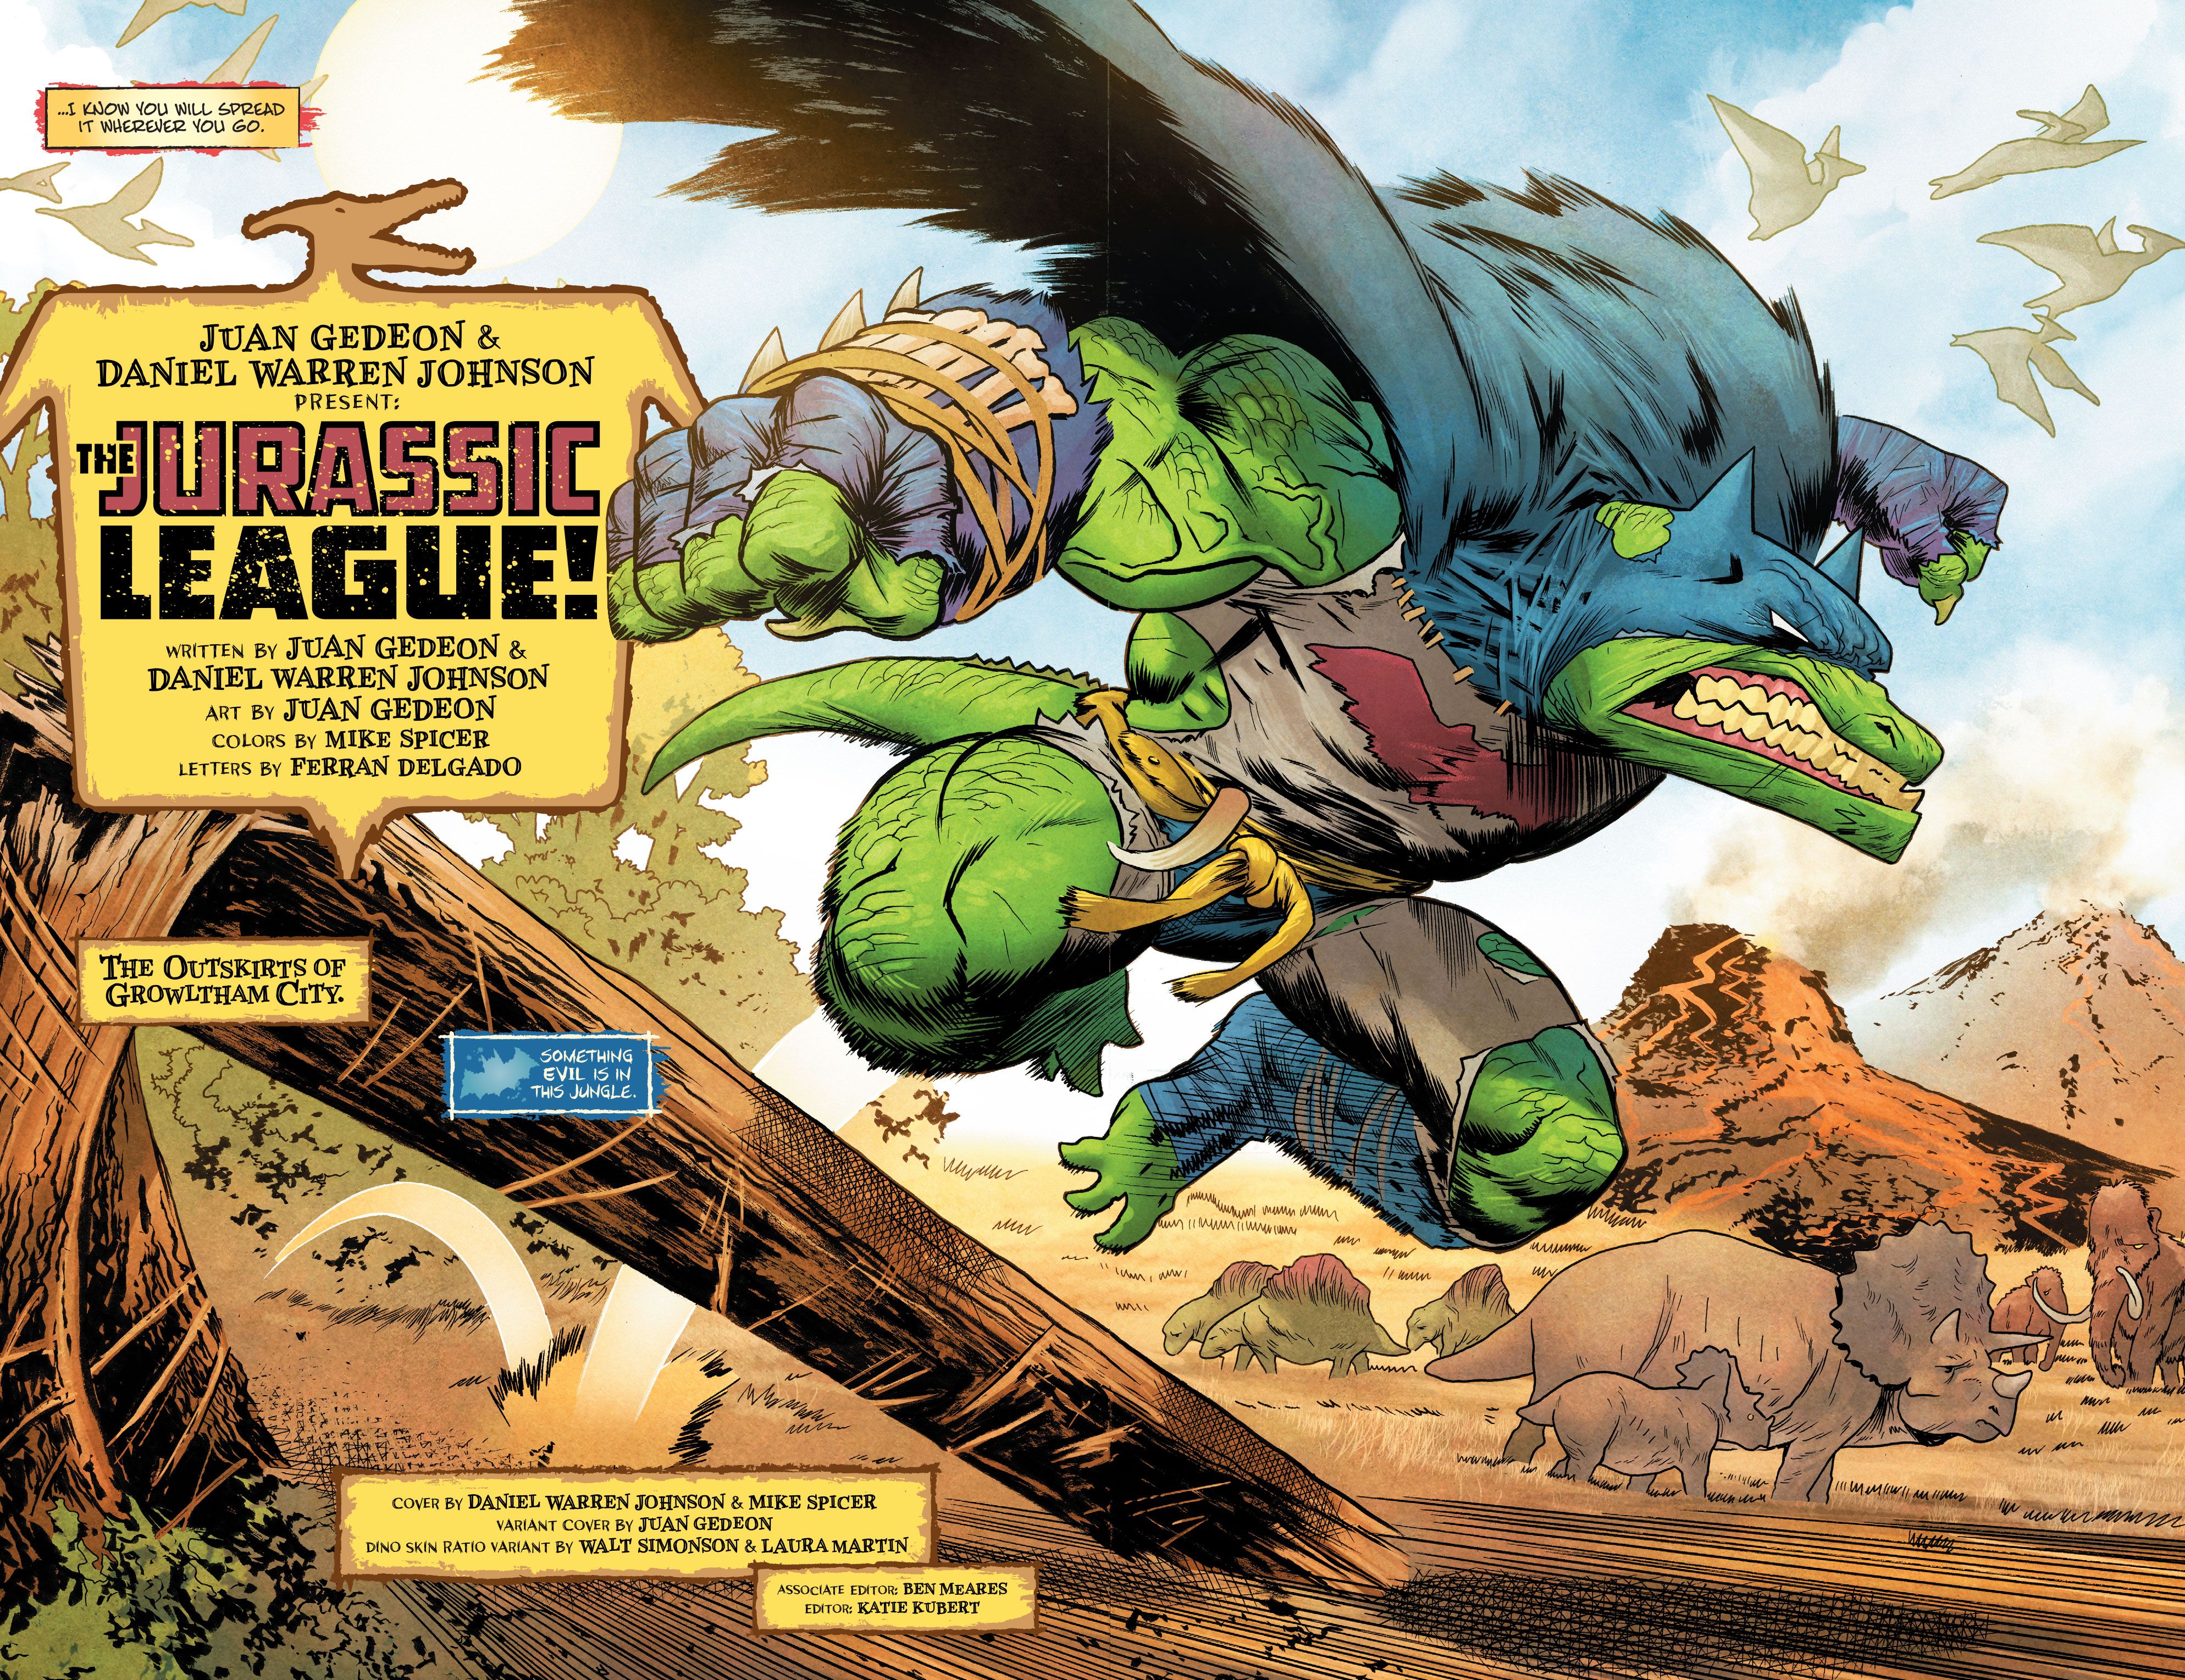 The Jurassic League Creators Dive Into Their DinoDriven Vision of the DCU